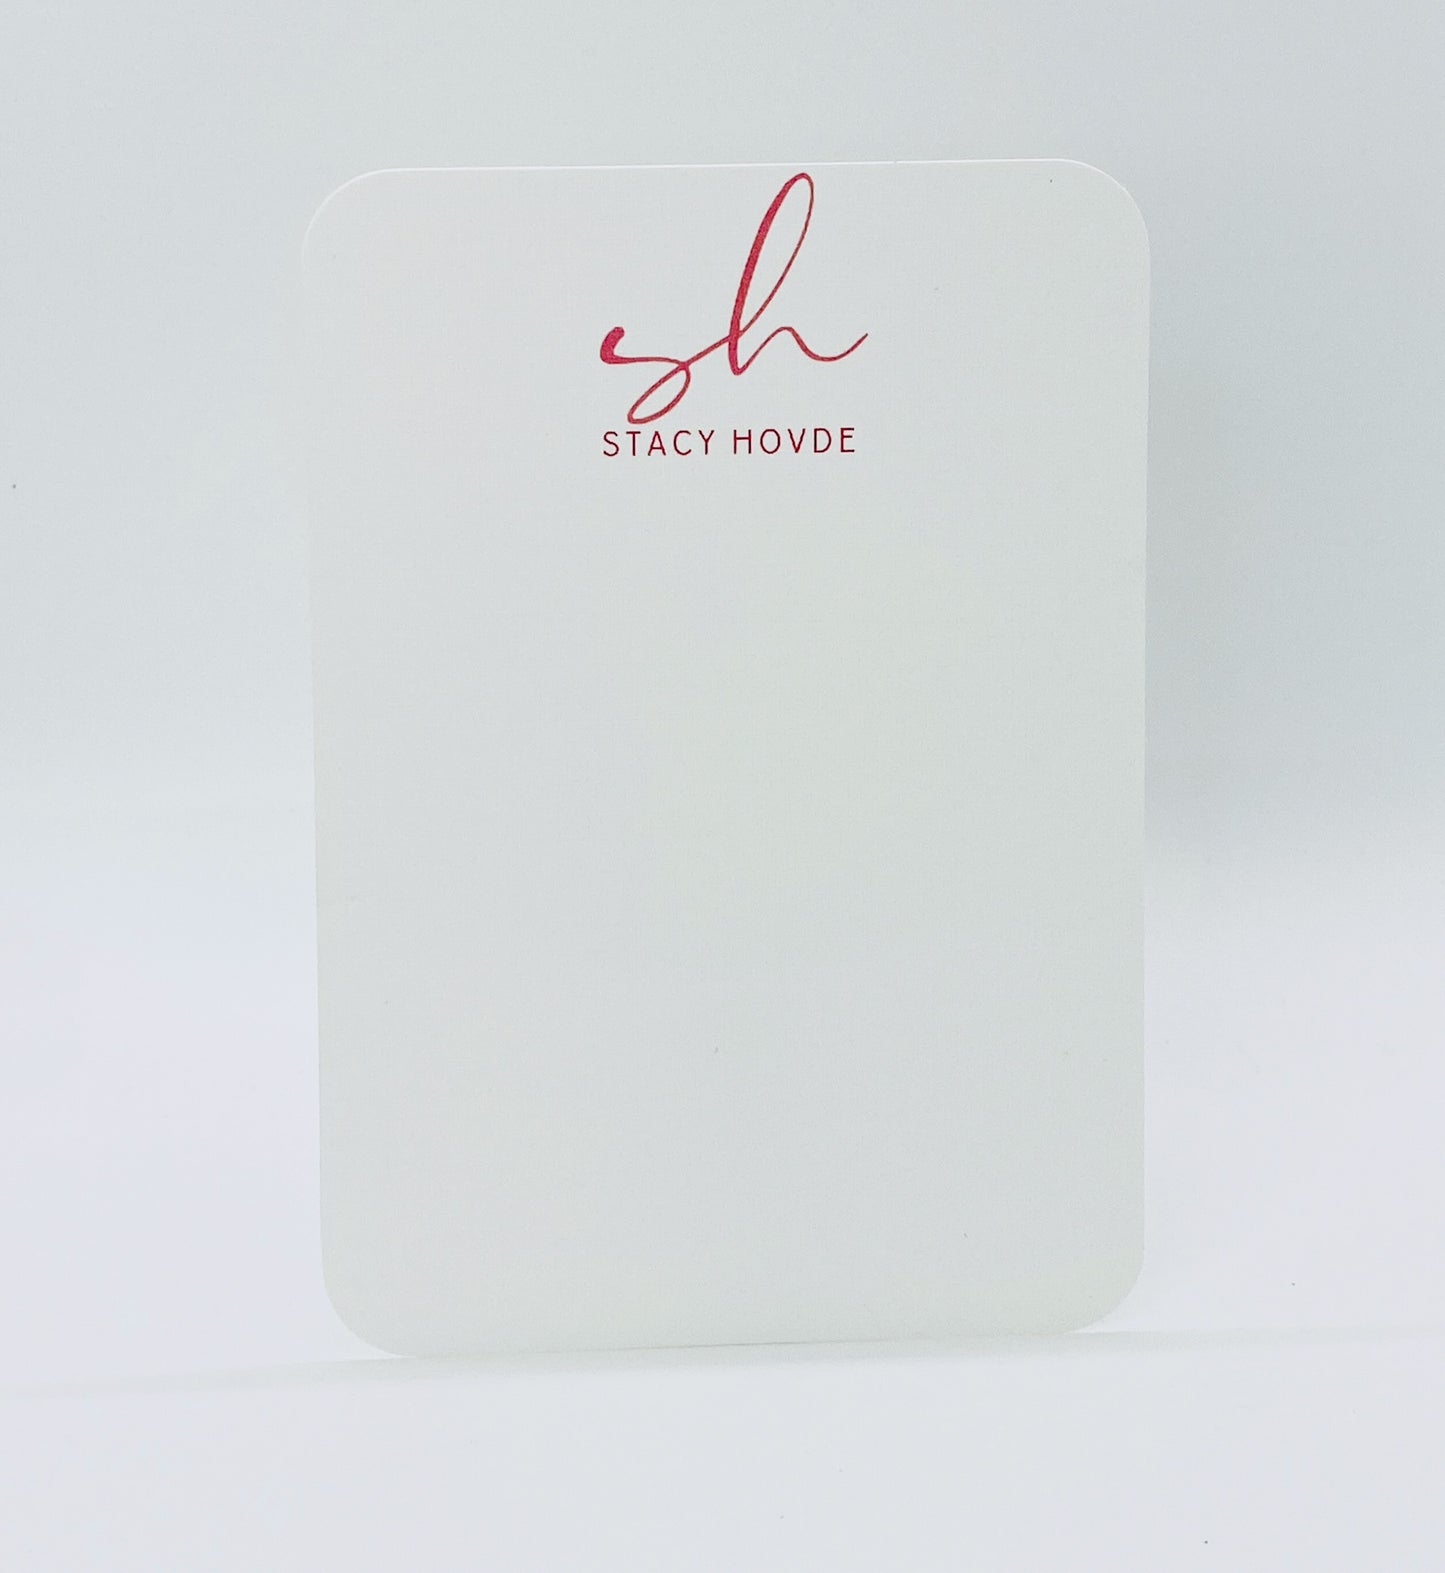 Personalized Jotter Cards, Pack of 25